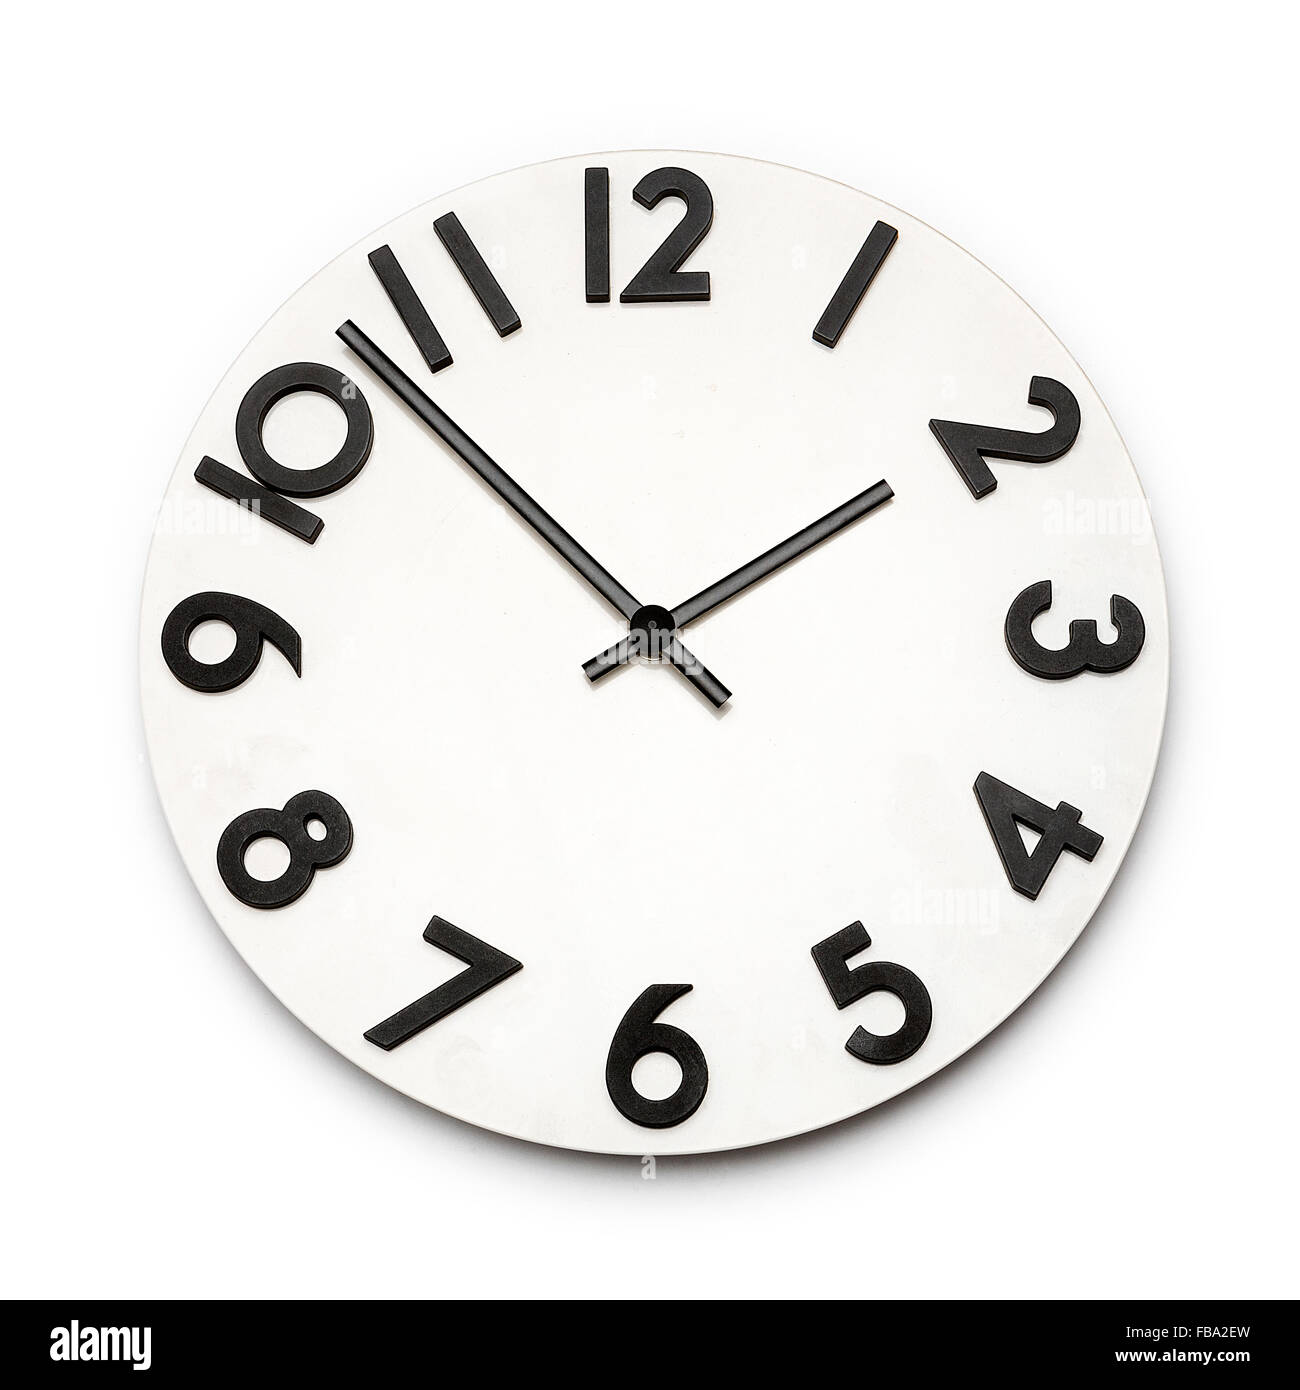 White clock face with black numbers isolated on a white background Stock Photo